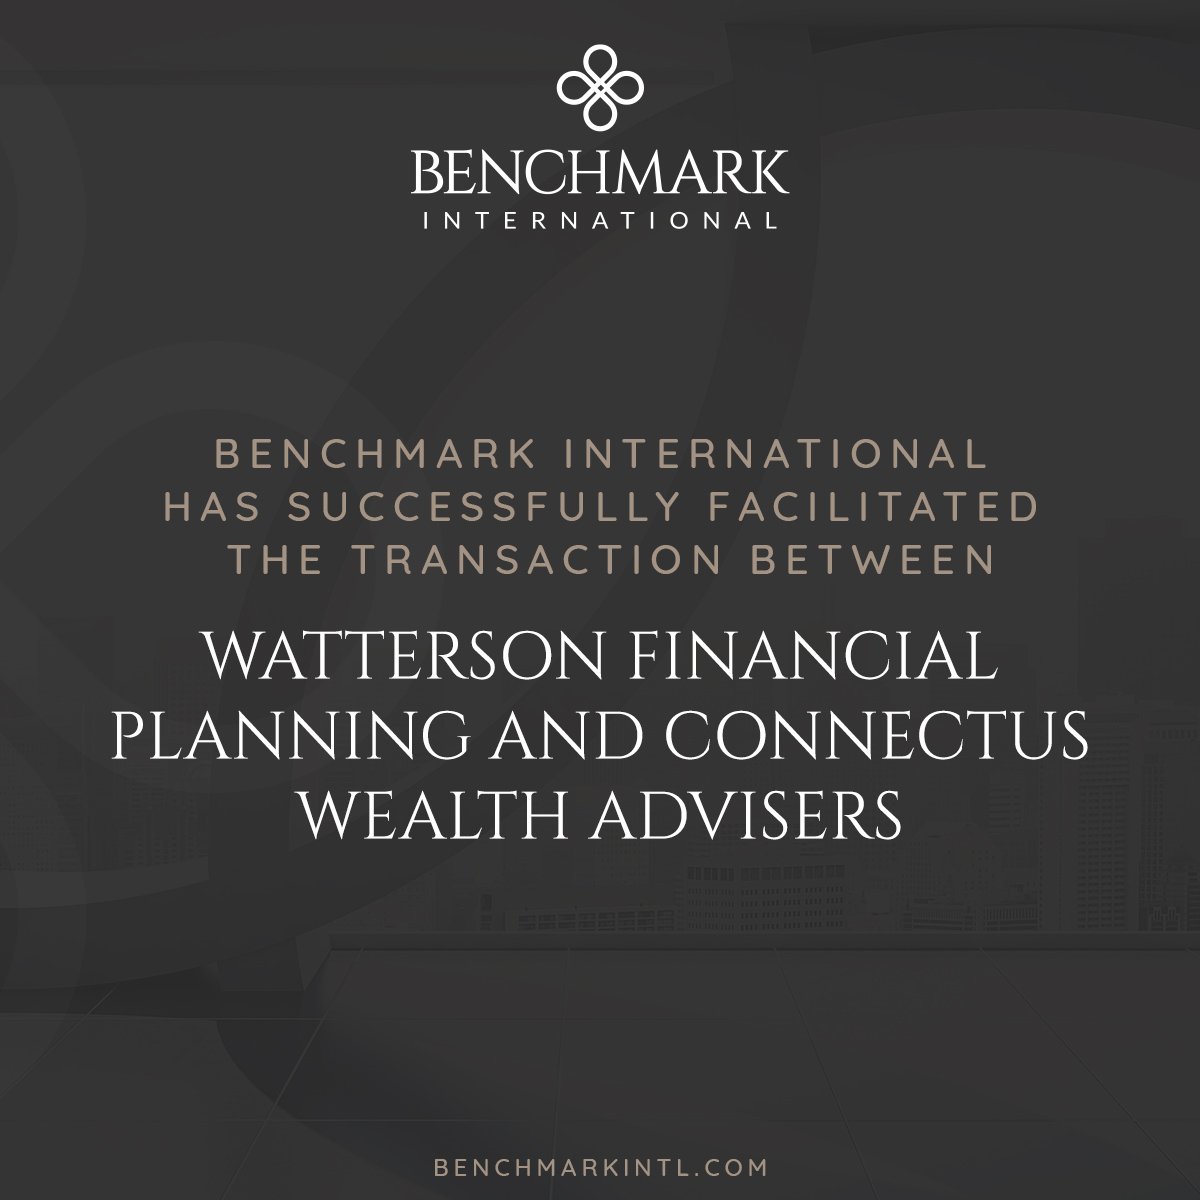 Watterson Financial Planning acquired by Connectus Wealth Advisers